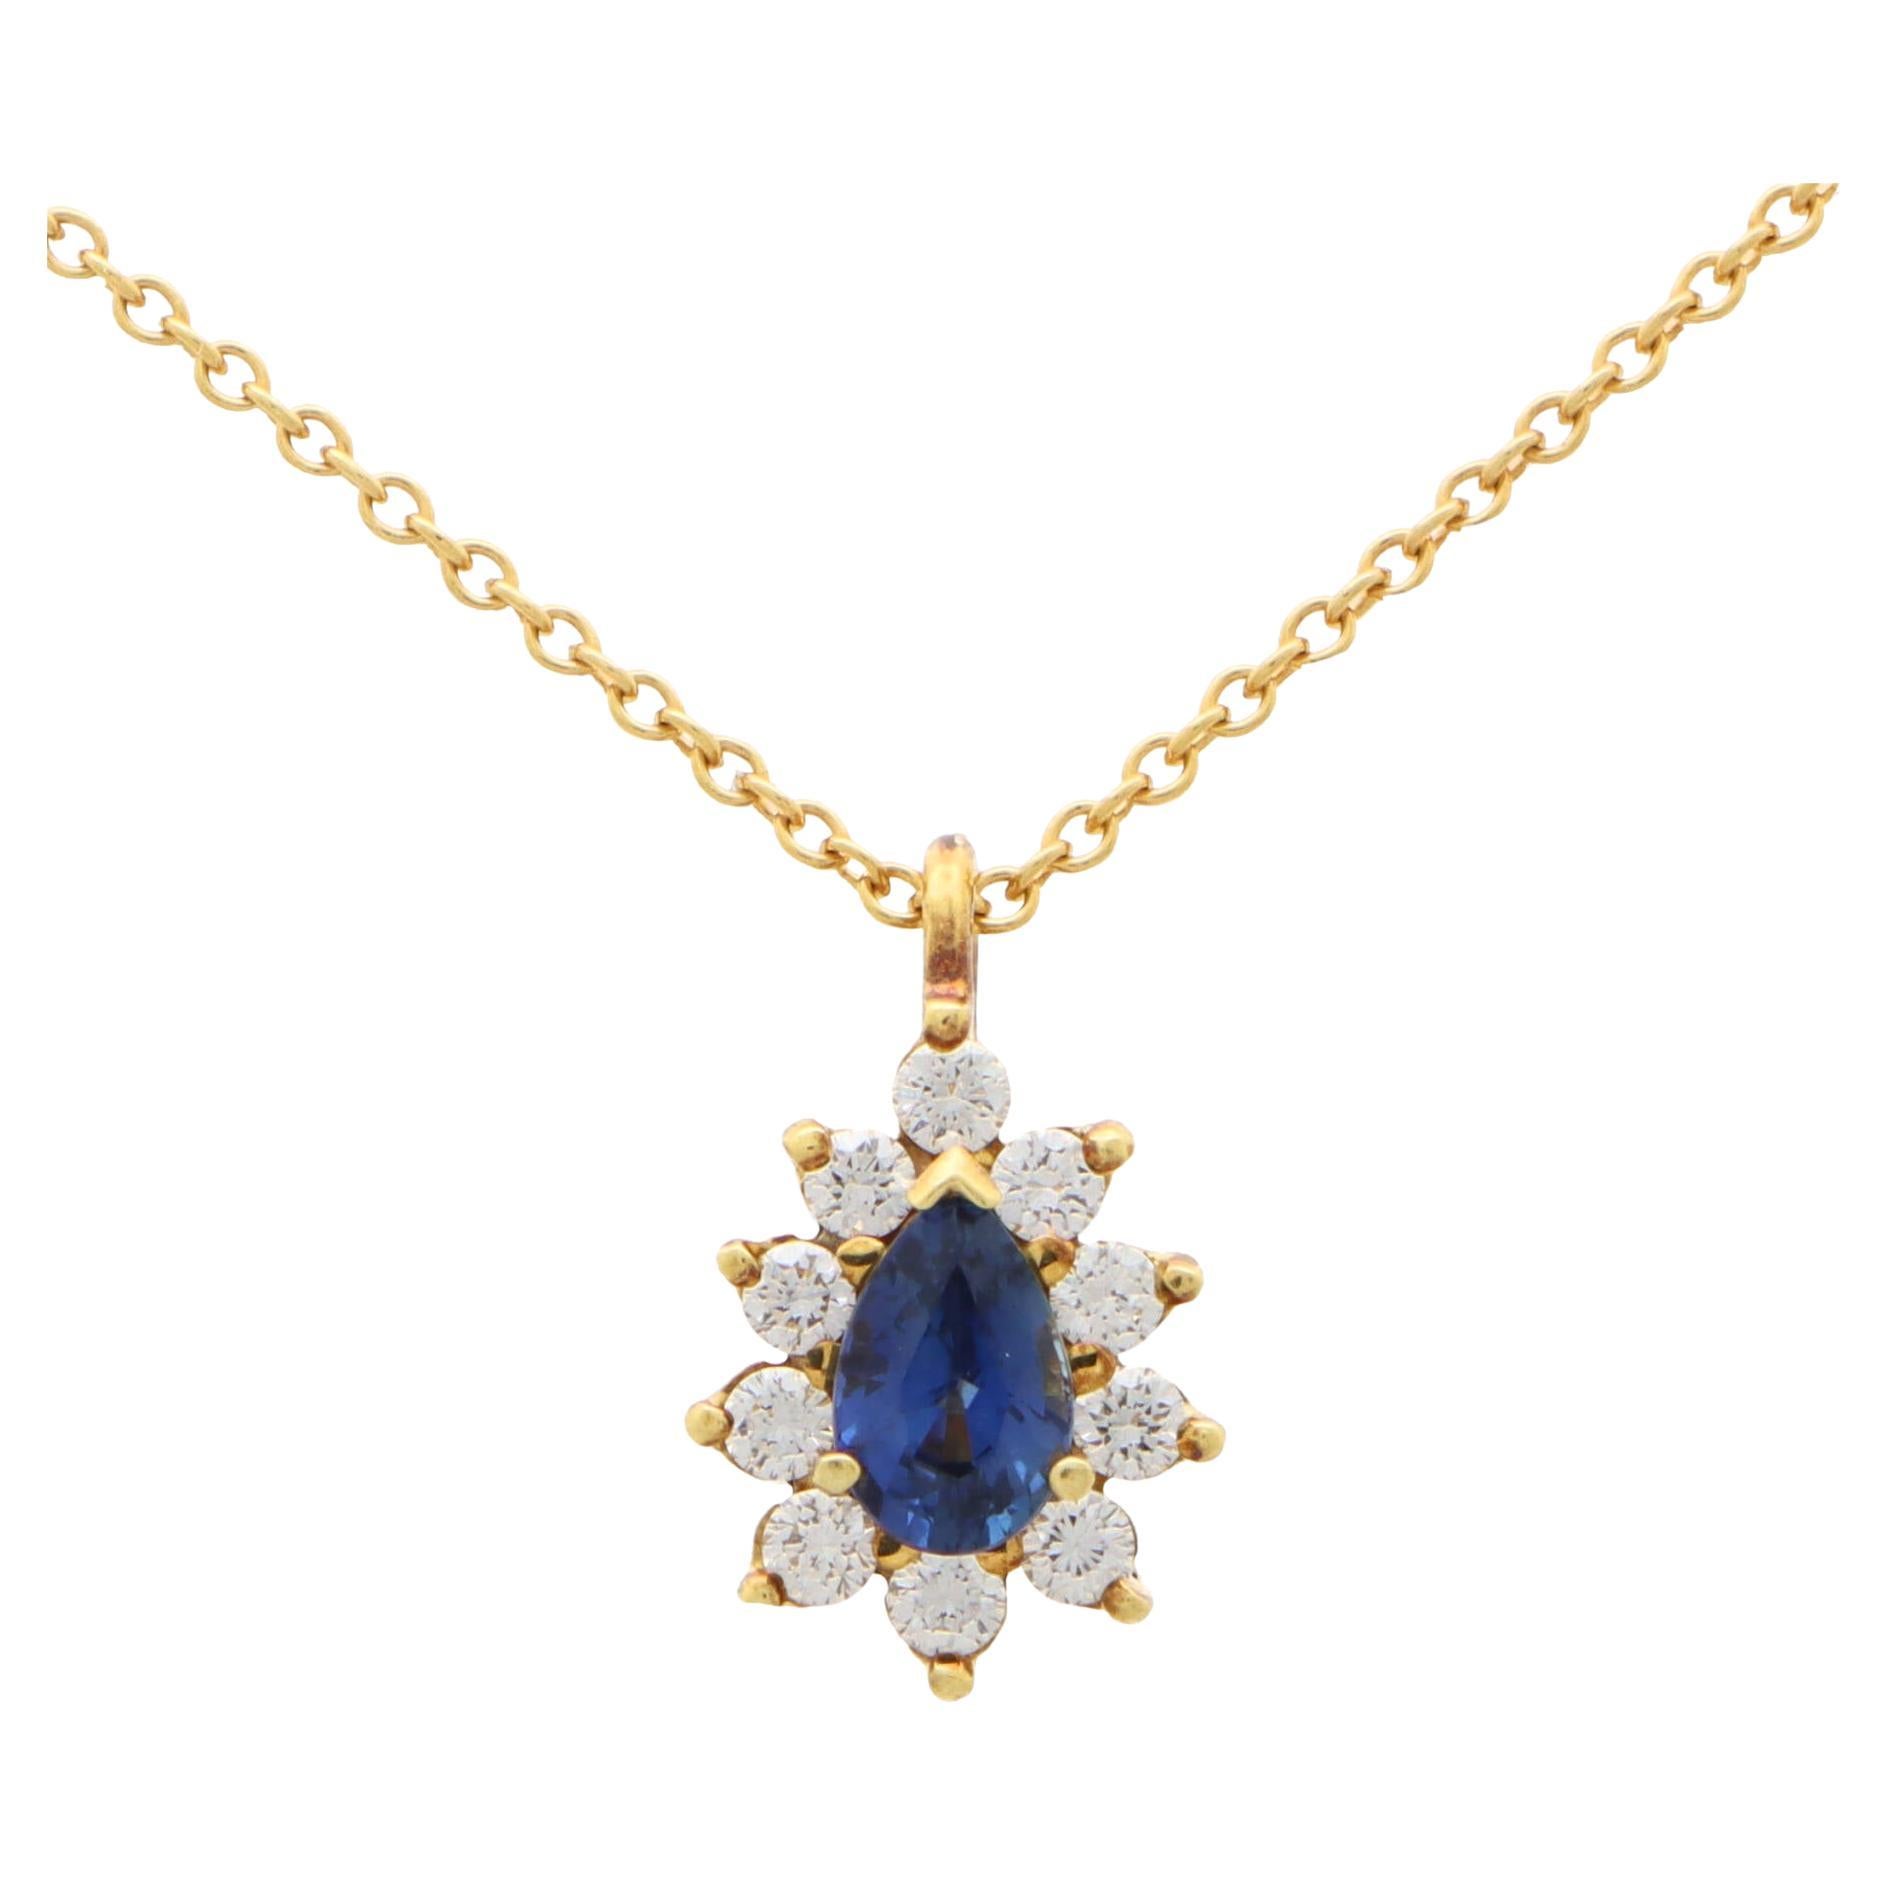 Vintage Tiffany & Co. Blue Sapphire and Diamond Cluster Pendant in 18k Gold